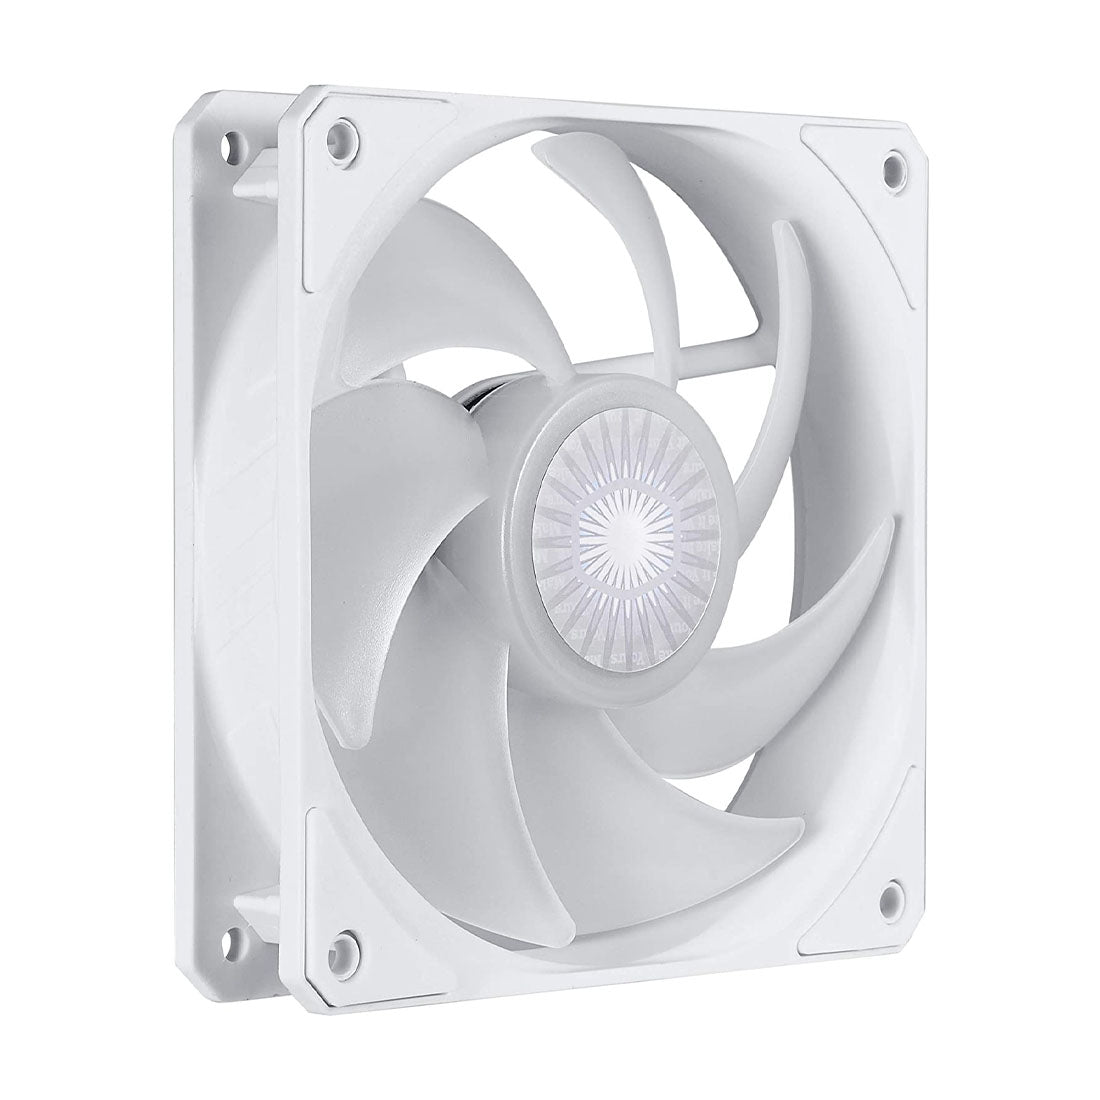 Cooler Master SICKLEFLOW 120 ARGB White Edition 3-in-1 Pack CPU Case Fan with ARGB Controller